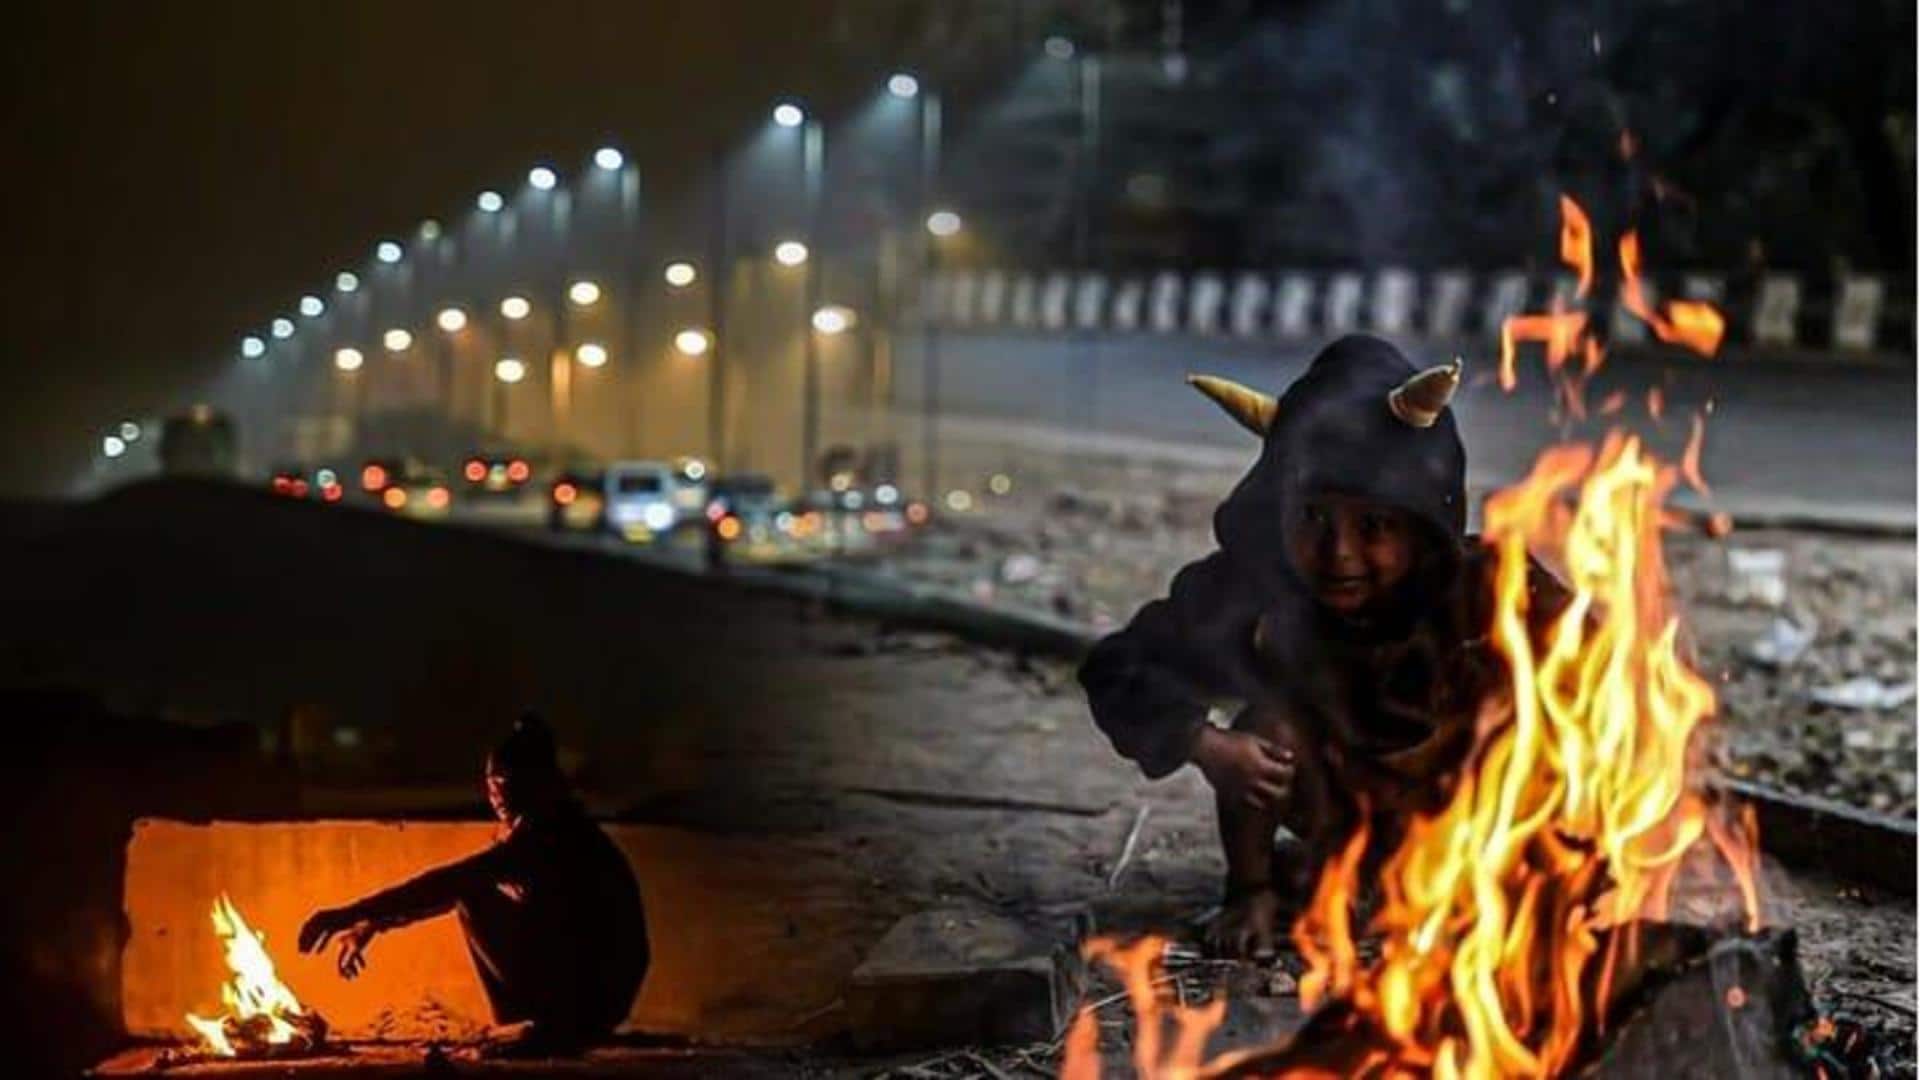 Chilliest since 2013: Delhi records coldest January in a decade